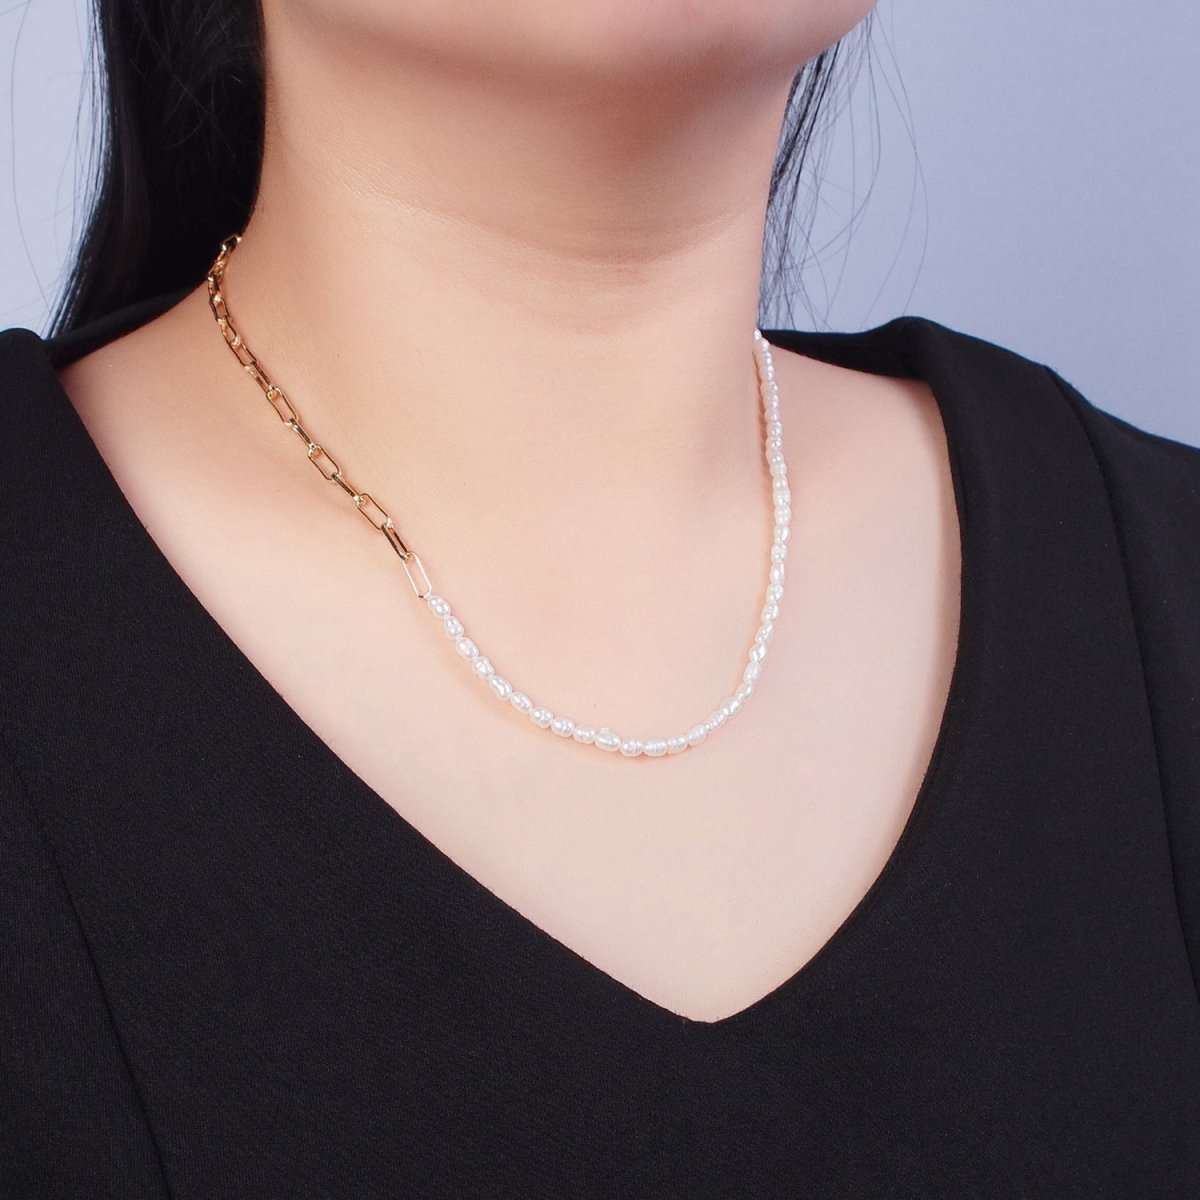 Half Pearl Half chain necklace in 18k gold fill | Layer Necklace Gold Paper Clip chain with White Freshwater Pearl | WA-1064 Clearance Pricing - DLUXCA